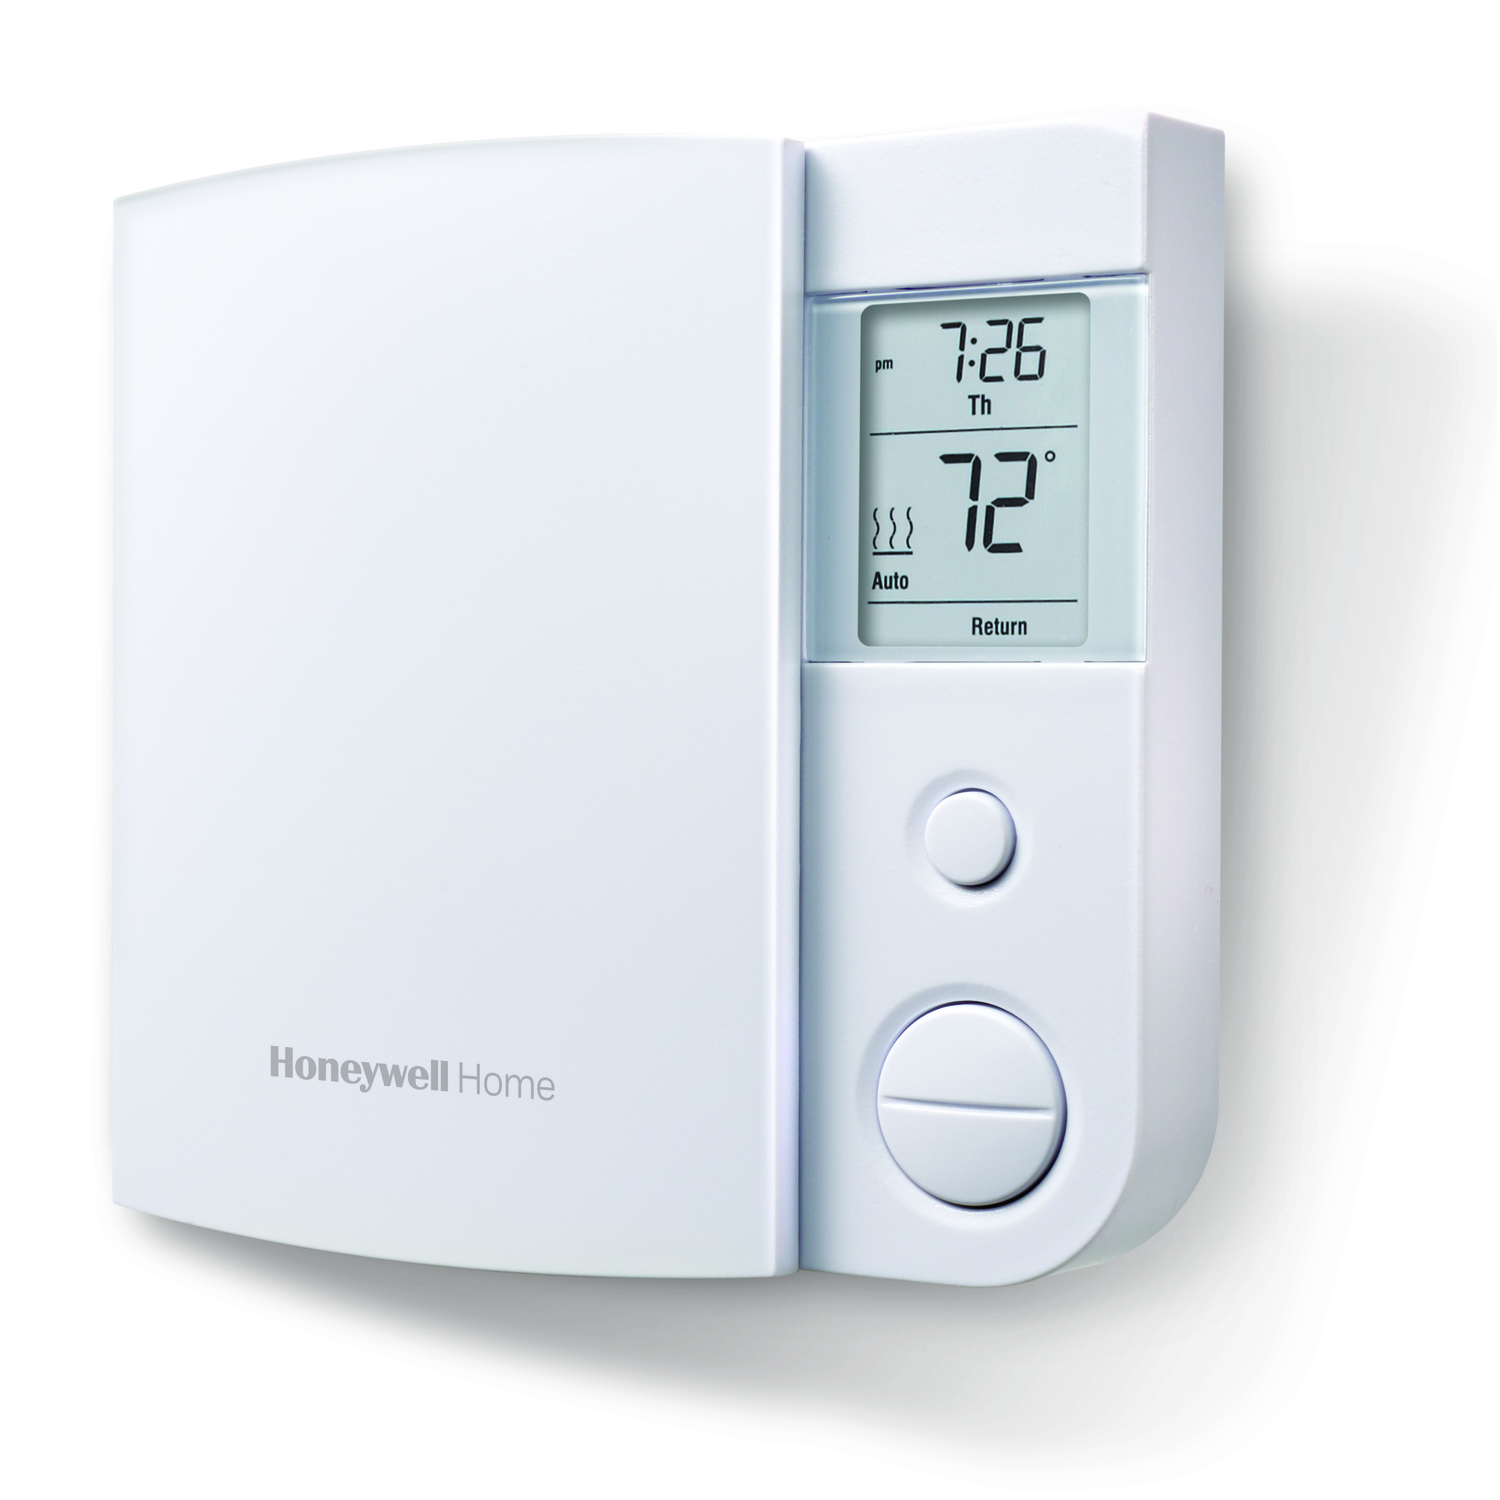 Photos - Thermostat Honeywell Heating and Cooling Push Buttons Programmable Baseboard Thermost 